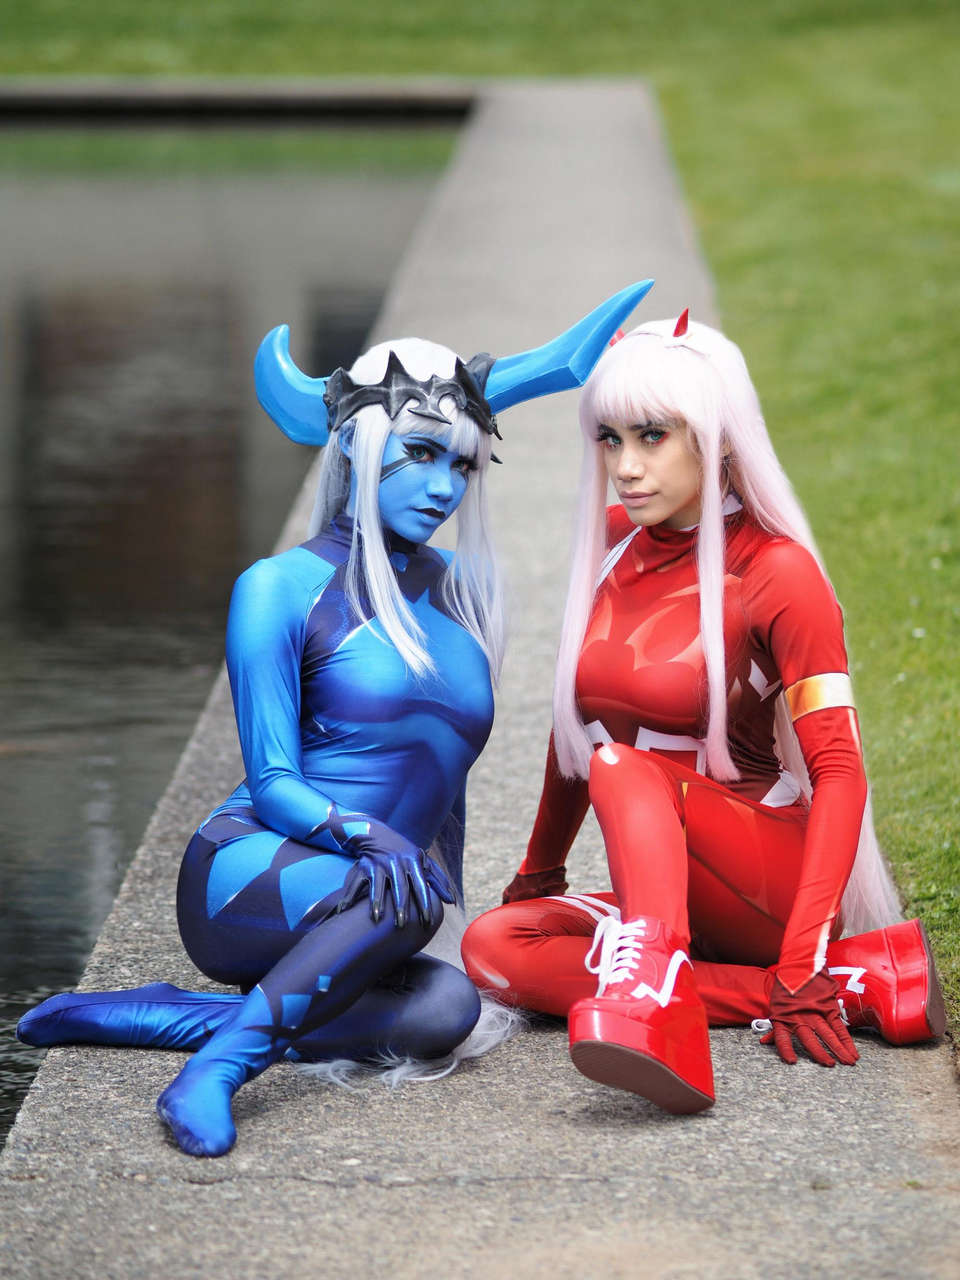 My Sister And Me As Zero Two And Klaxosaur Princes